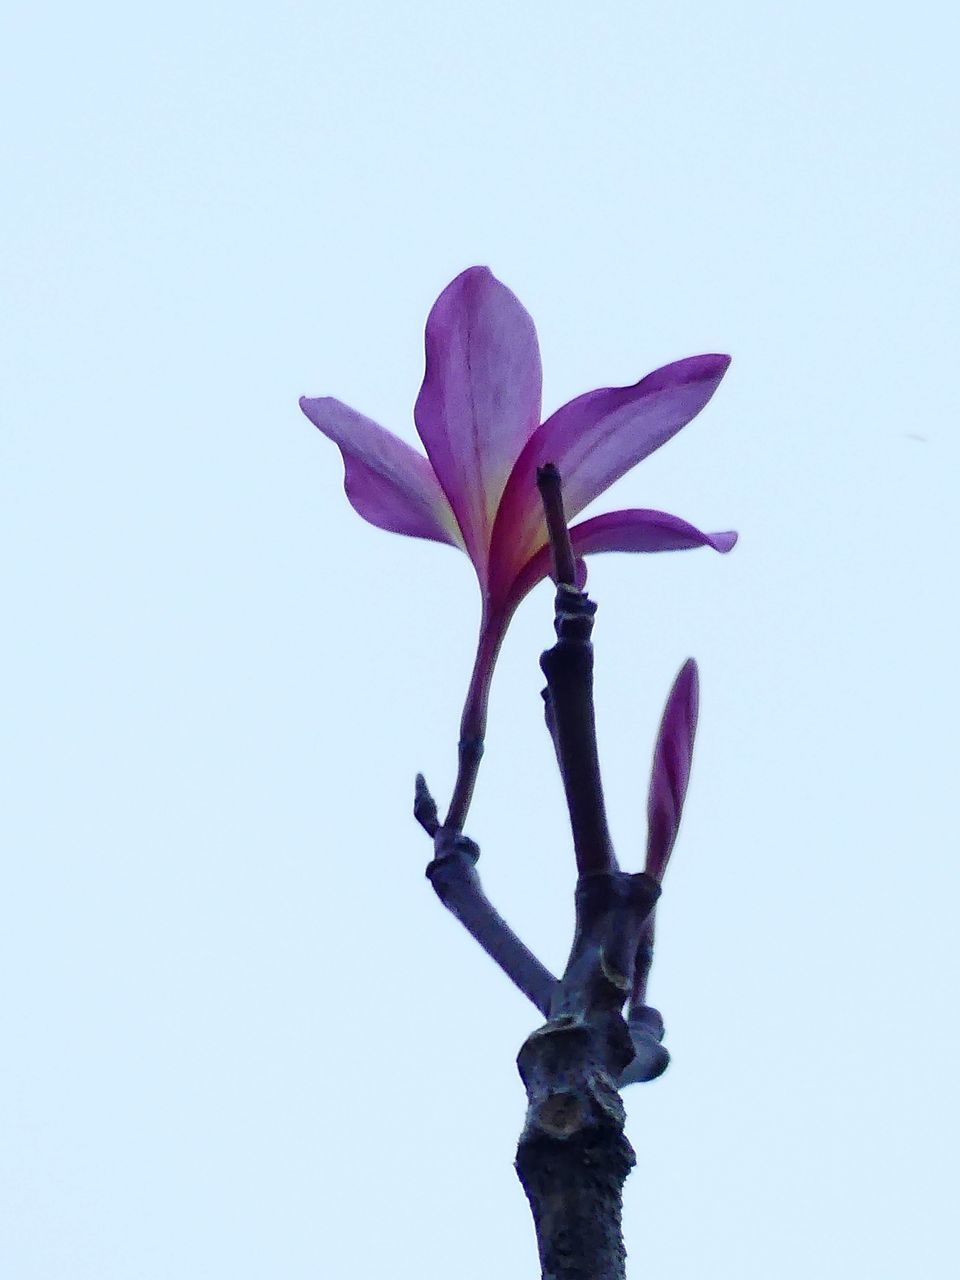 CLOSE-UP OF FLOWER AGAINST CLEAR SKY